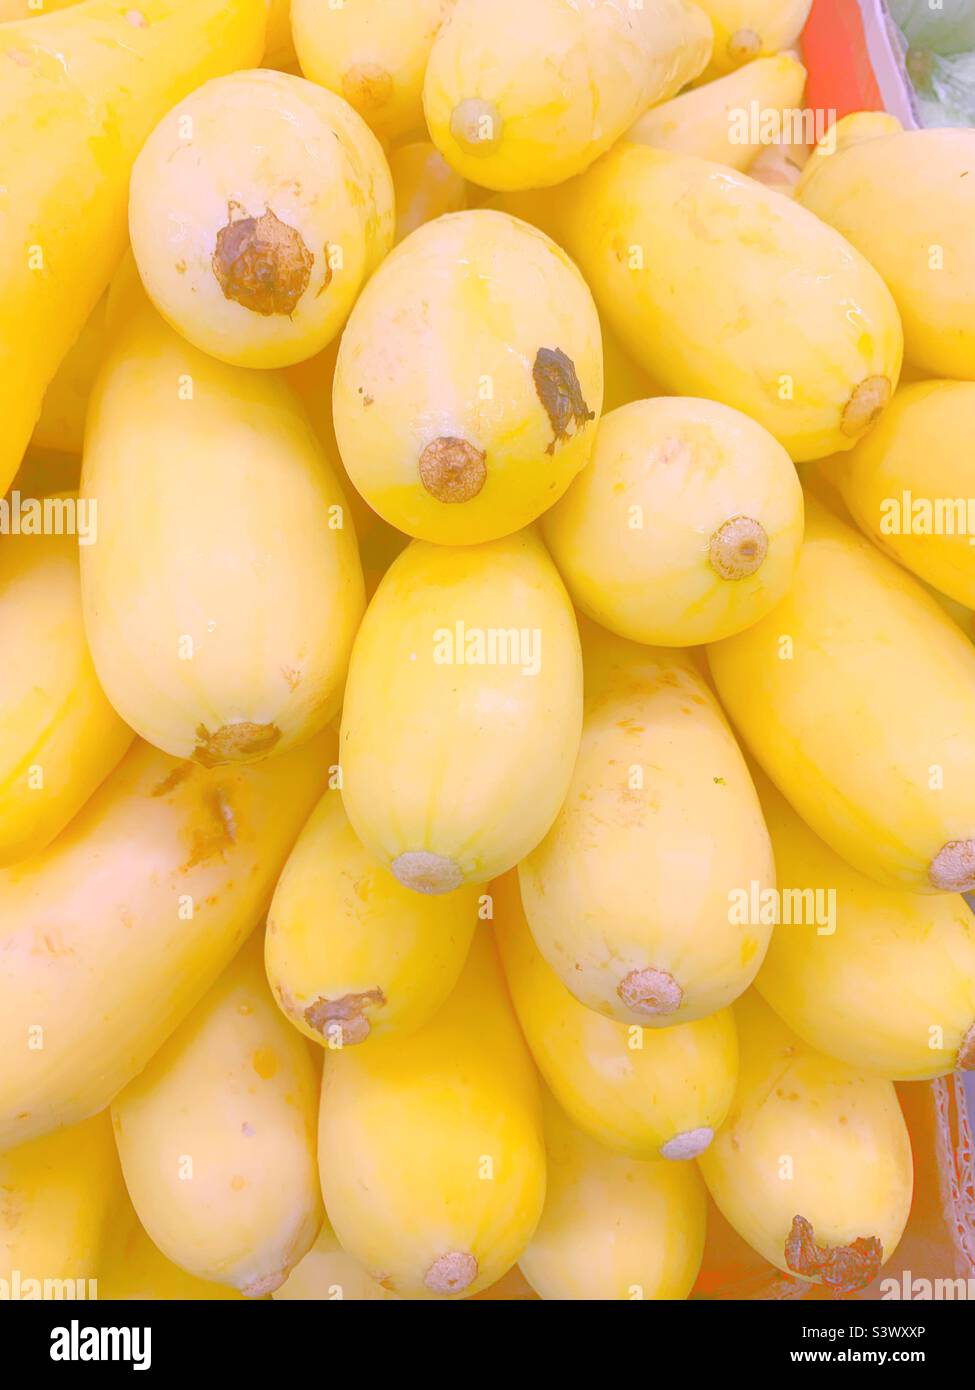 Faded photograph of bright yellow squash for sale at the garden fresh market. Stock Photo